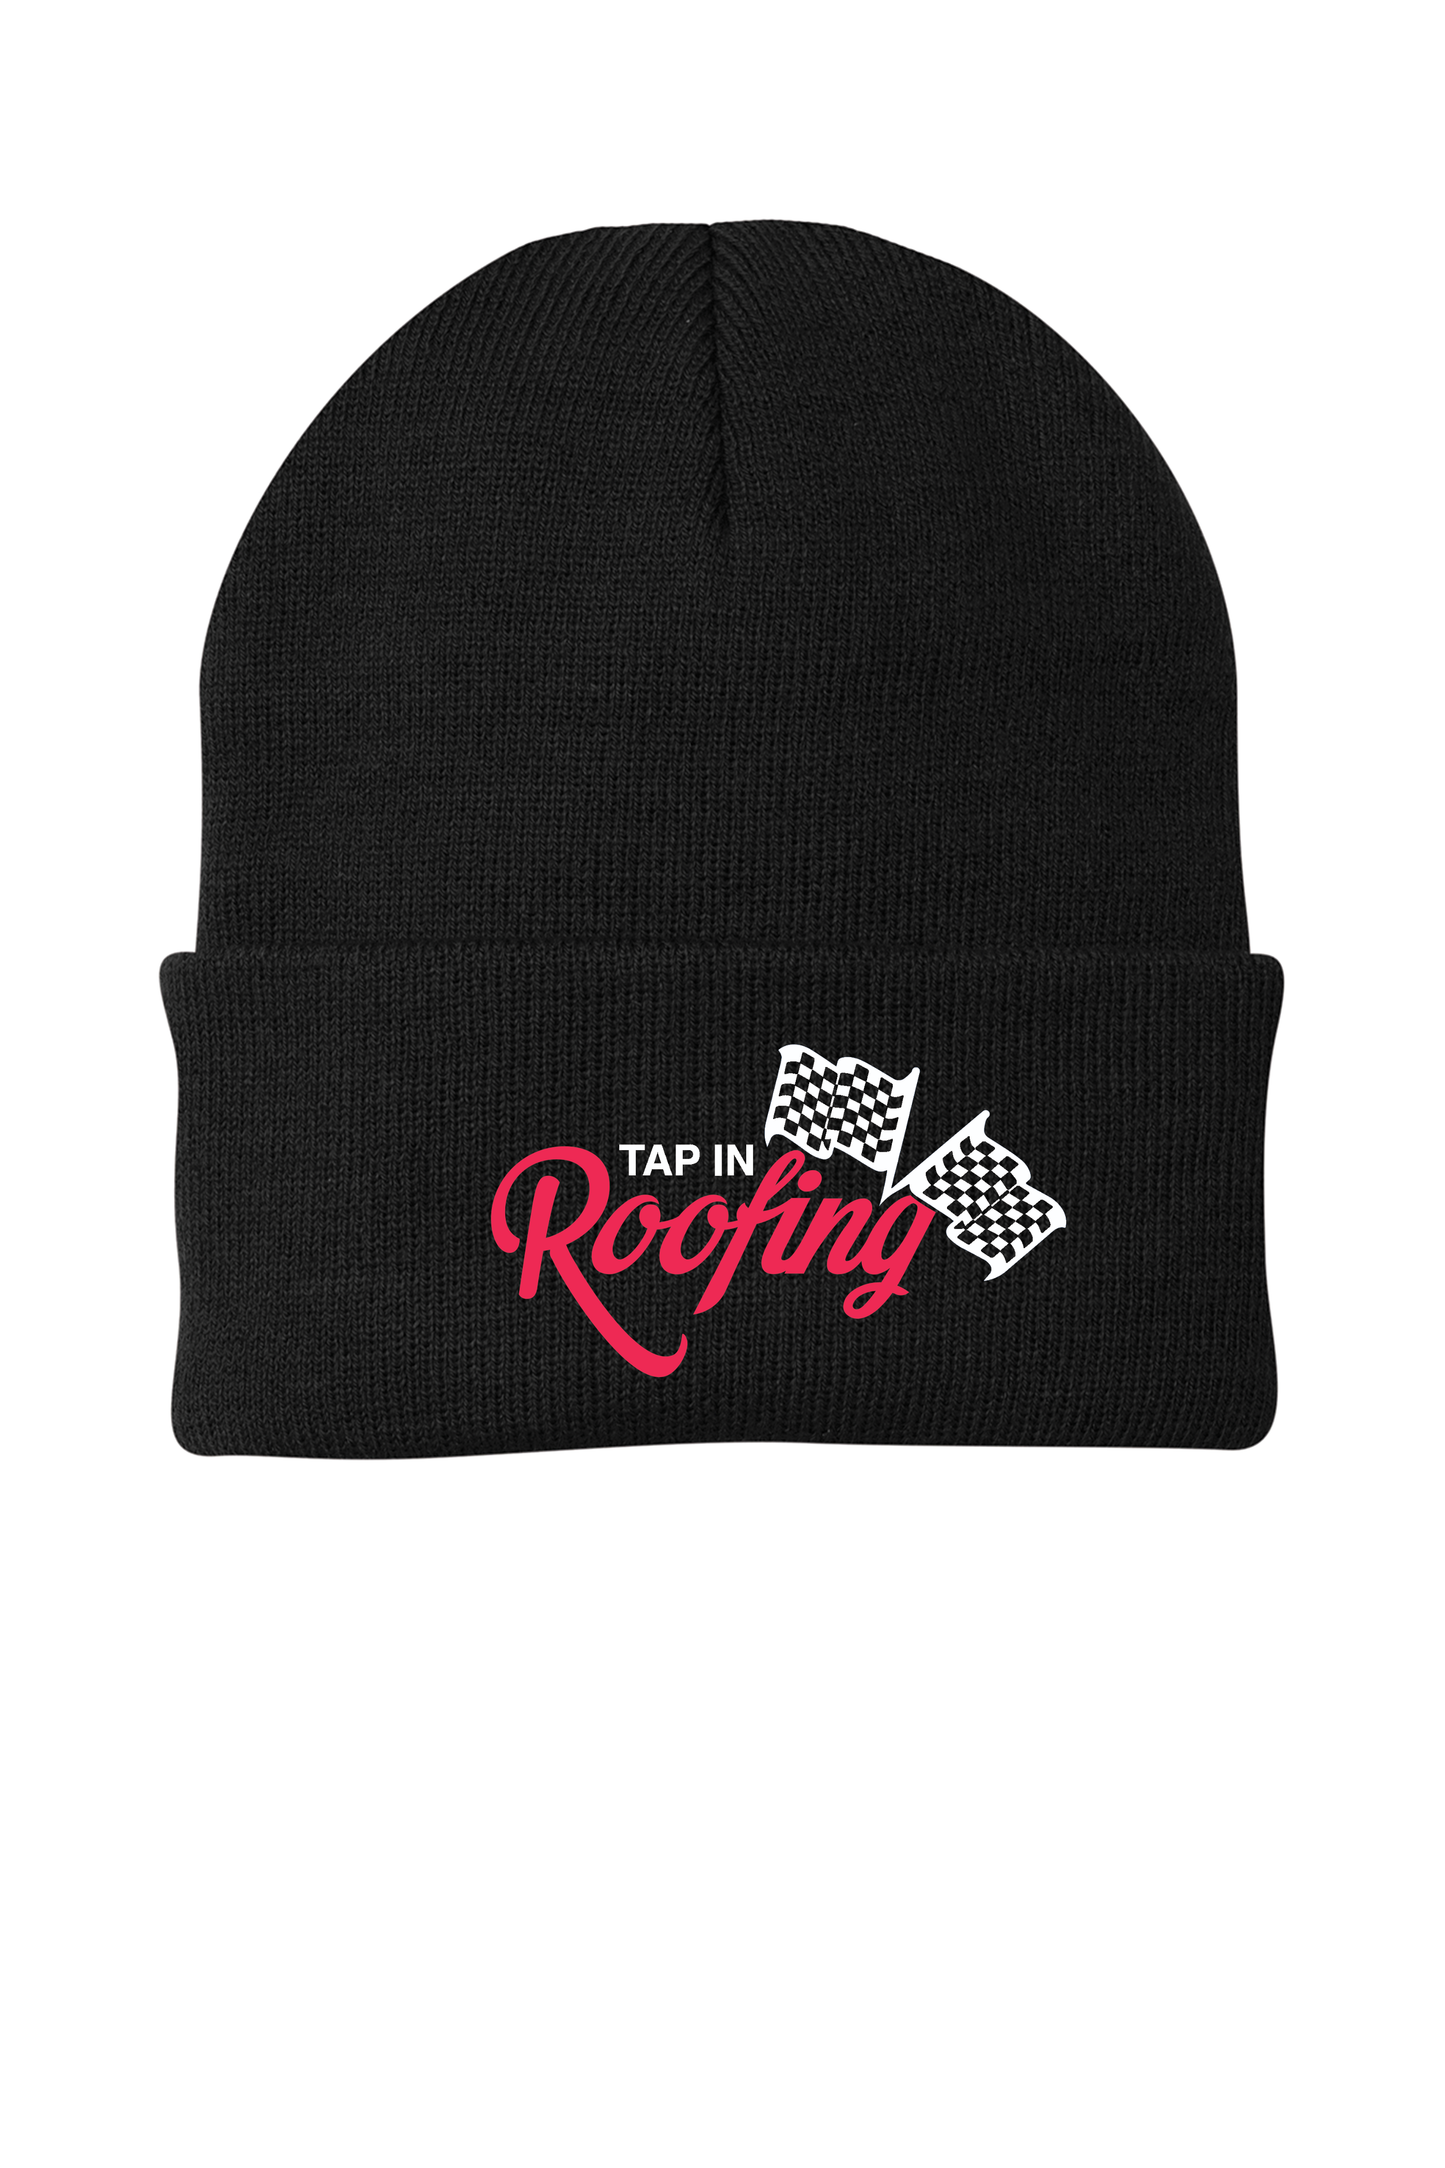 Tap In Roofing Beanie